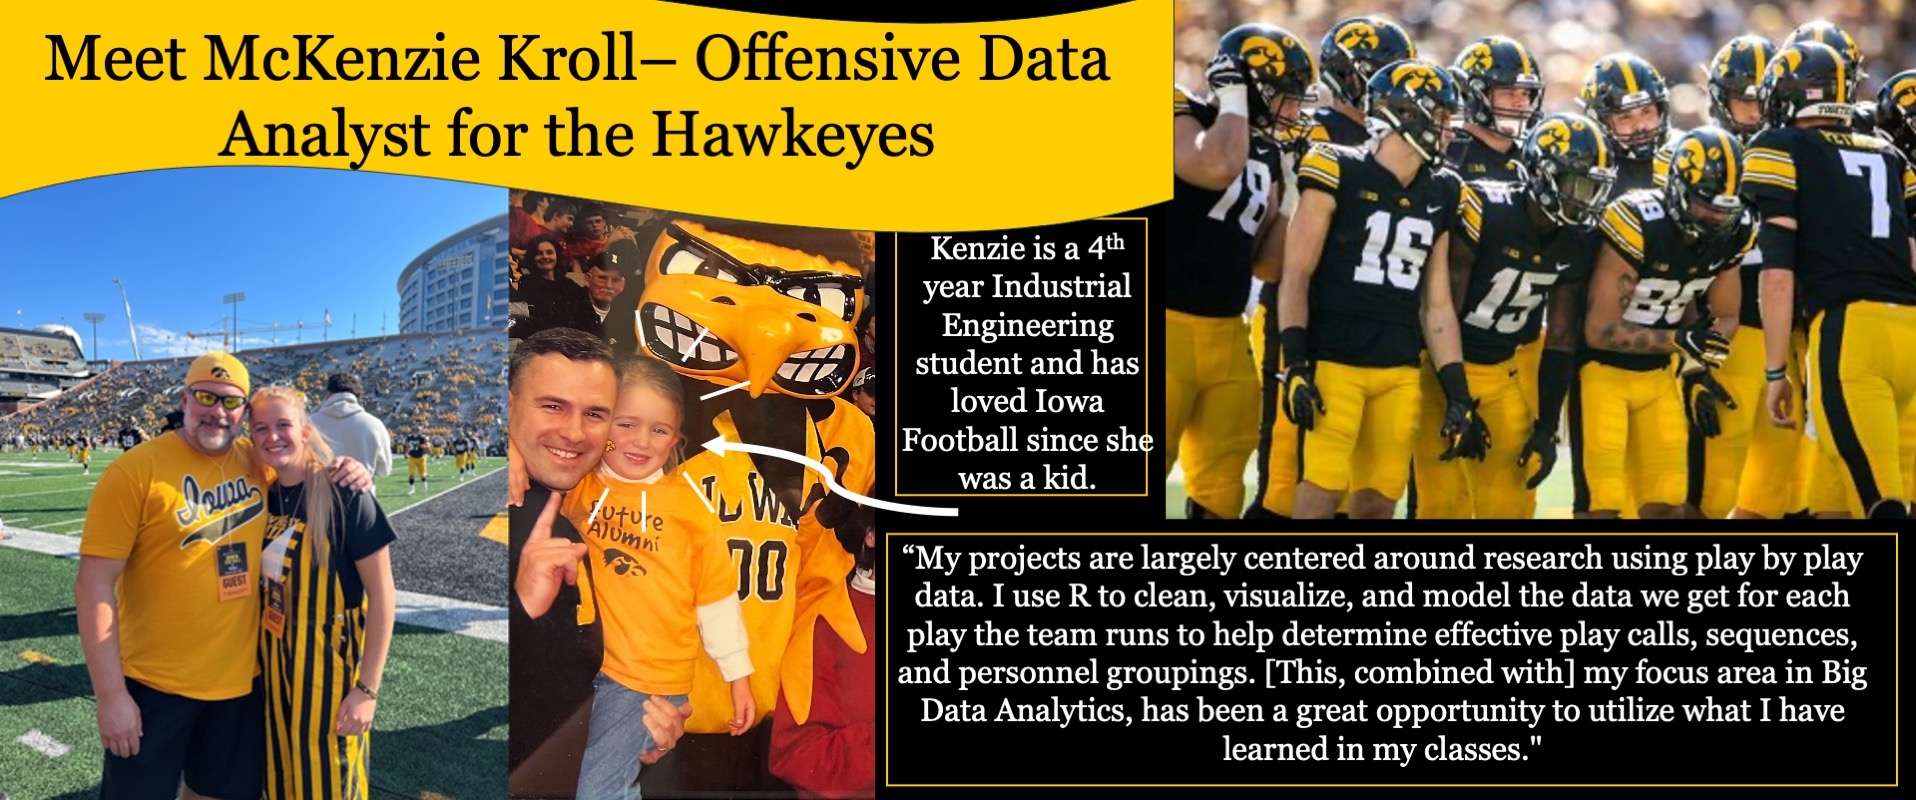 Kenzie Offensive Data Analyst for the Hawkeyes